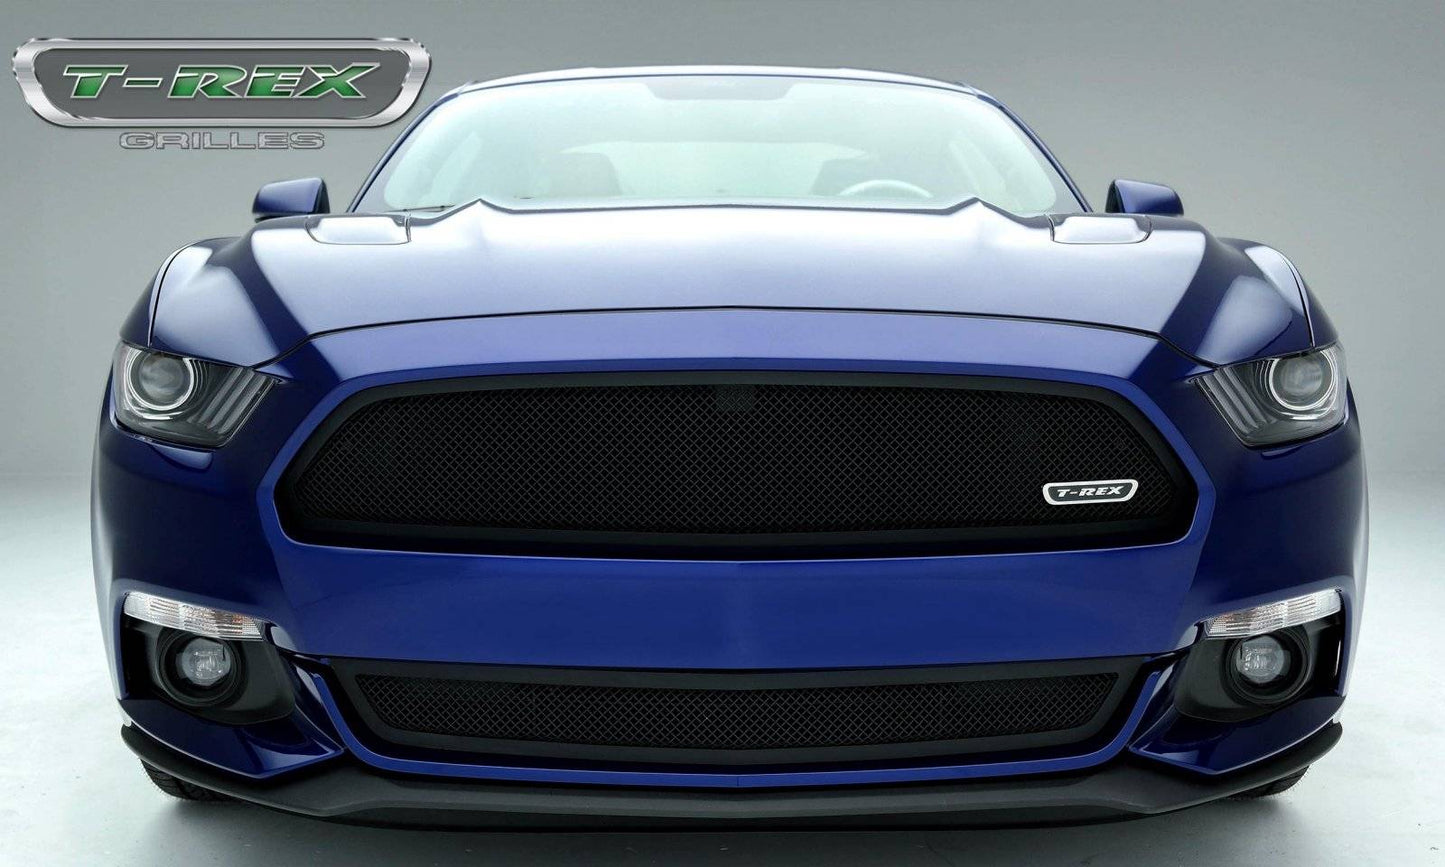 T-REX Grilles 51530 Black Mild Steel Small Mesh Grille Fits 2015-2017 Ford Mustang GT